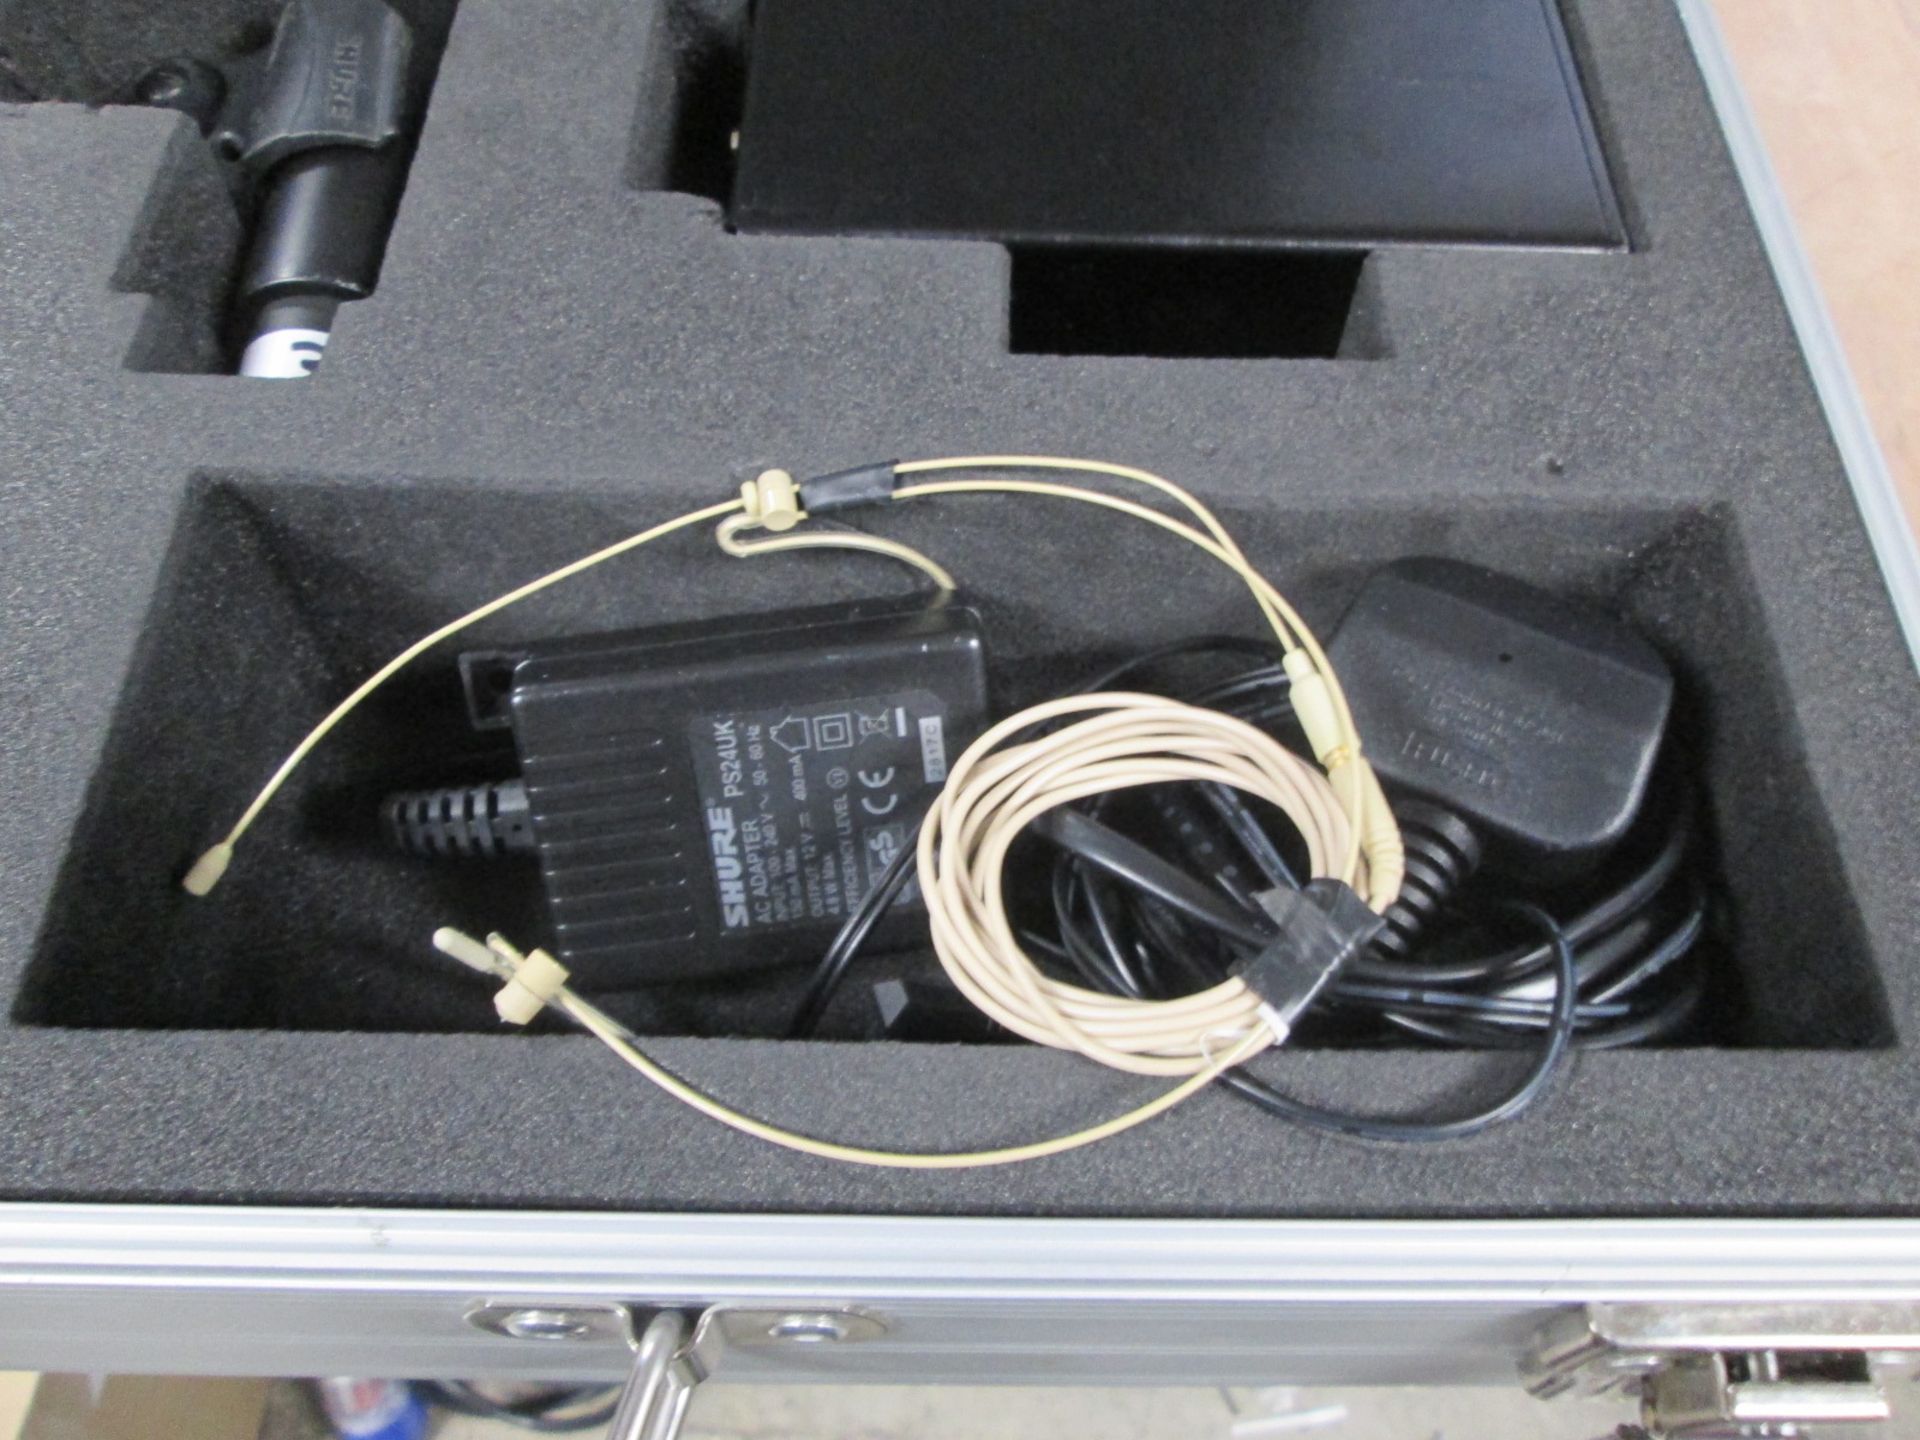 Shure QLXD4 Single Channel Radio Mic Kit 606-670 MHz (Qty 5) Kit to include K51 receiver, QLXD2 - Image 6 of 8